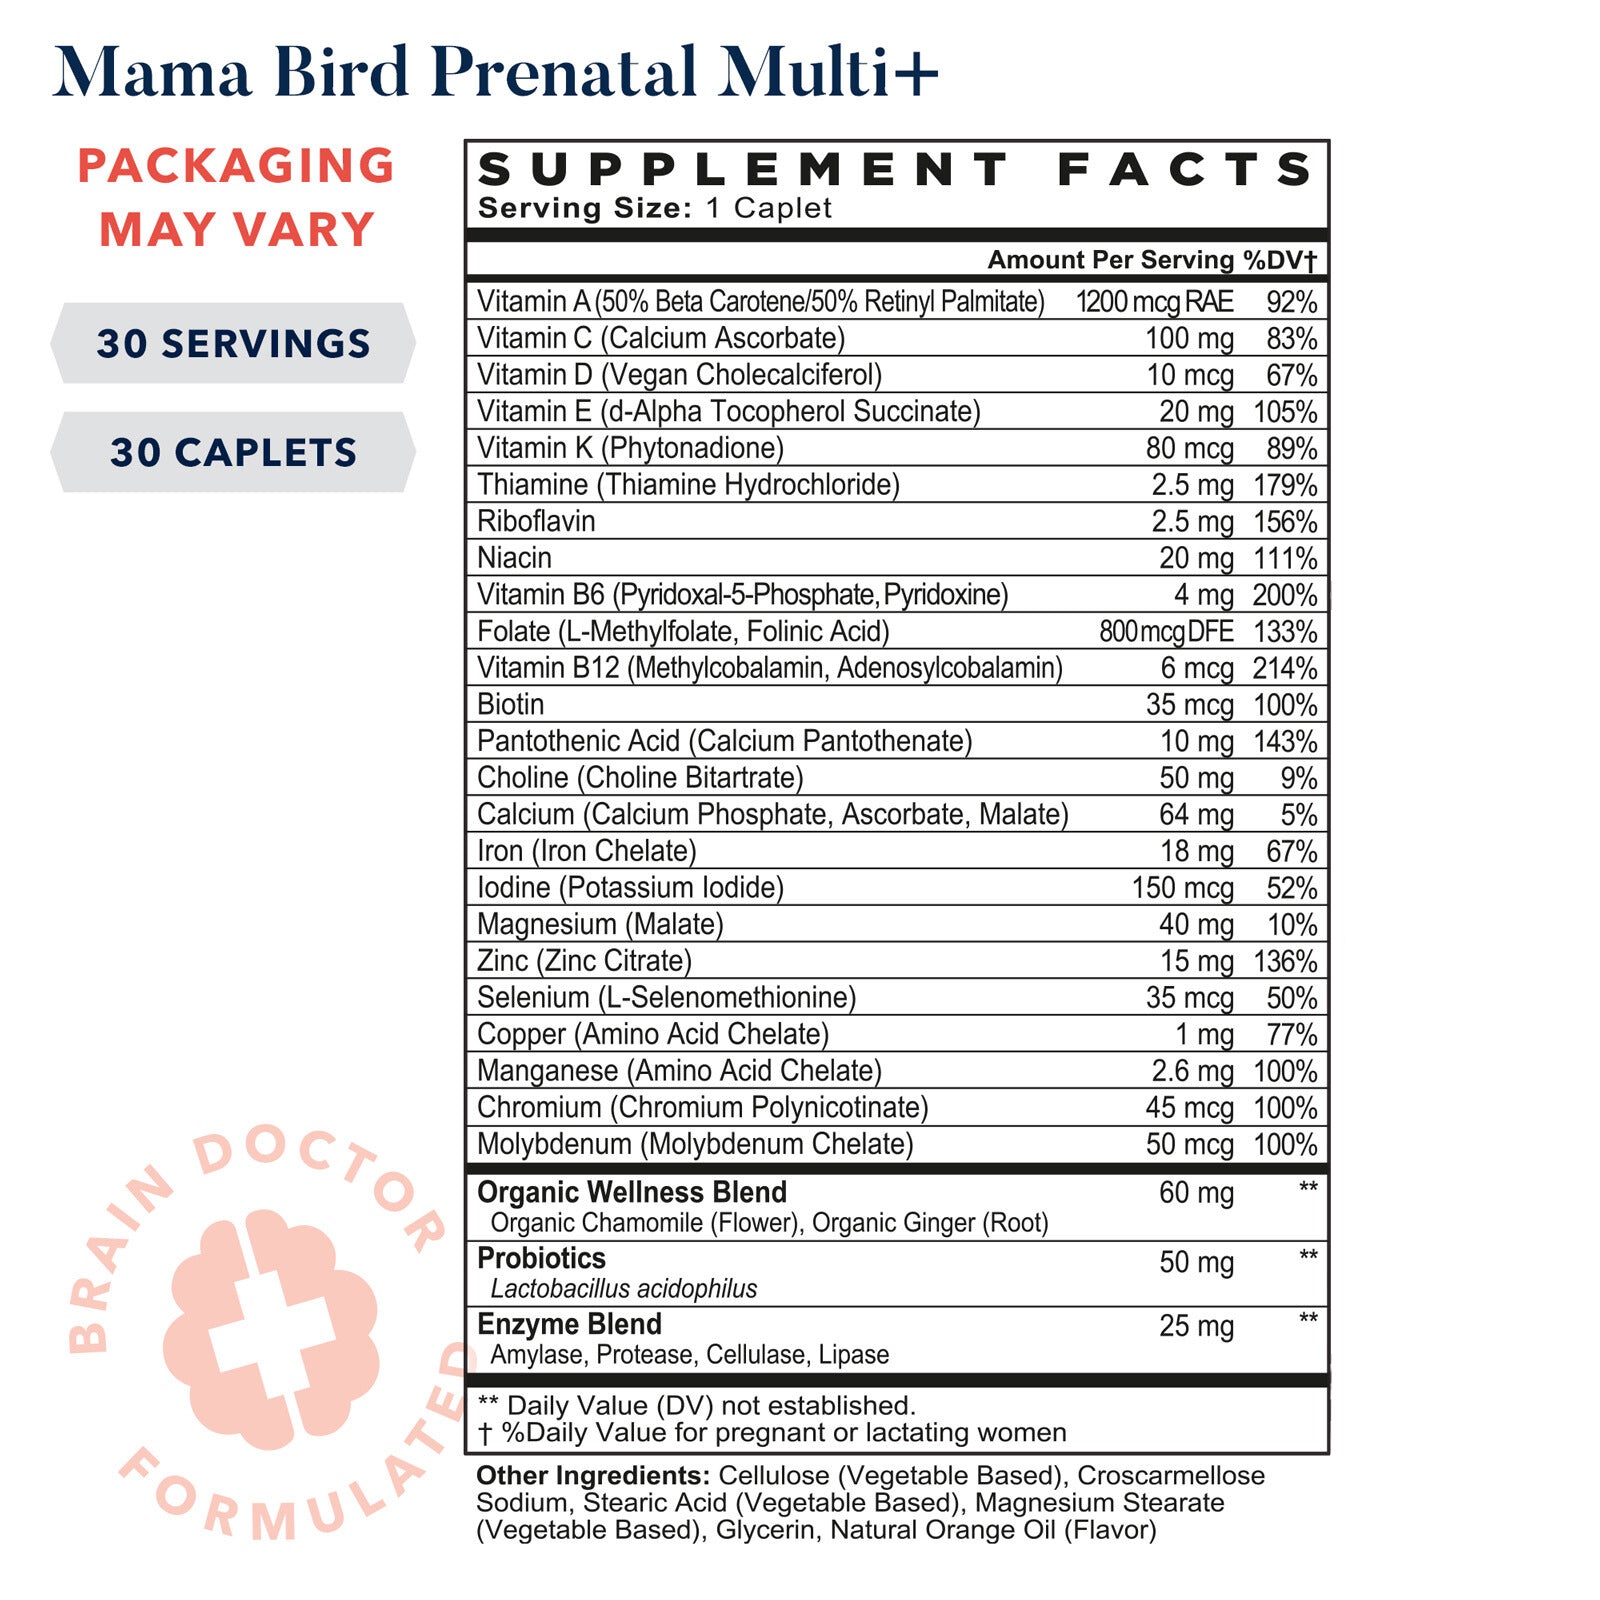 Mama Bird Prenatal Multi+ label with nutrition information and logo details for baby's brain development.